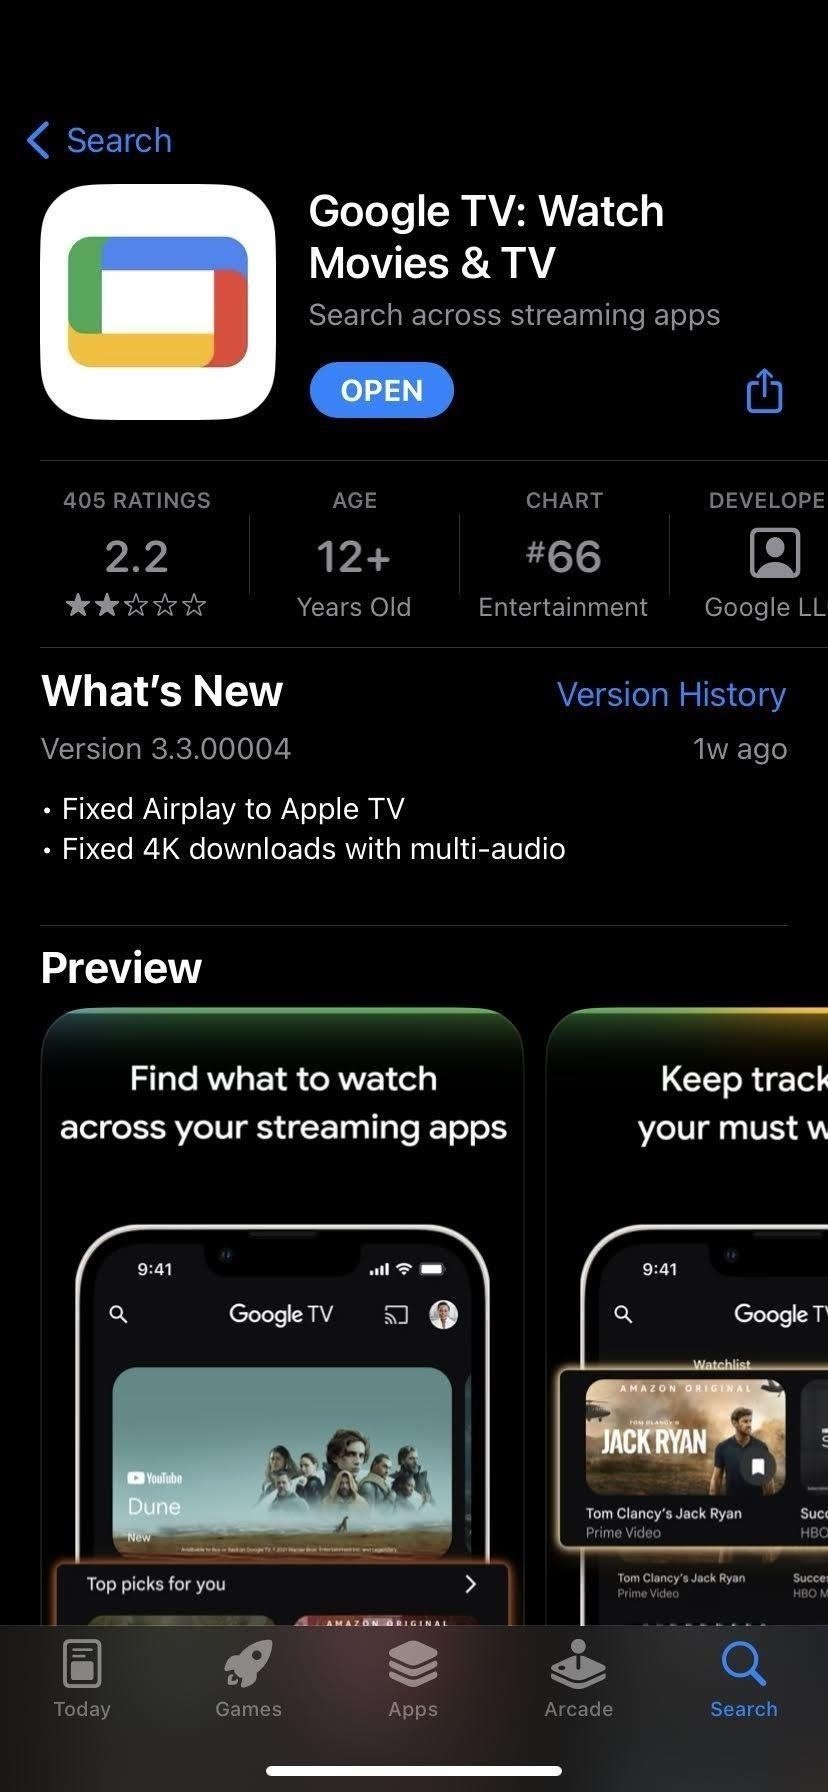 How to Use Your iPhone or Android Phone as a Remote Control for Android TV or Google TV